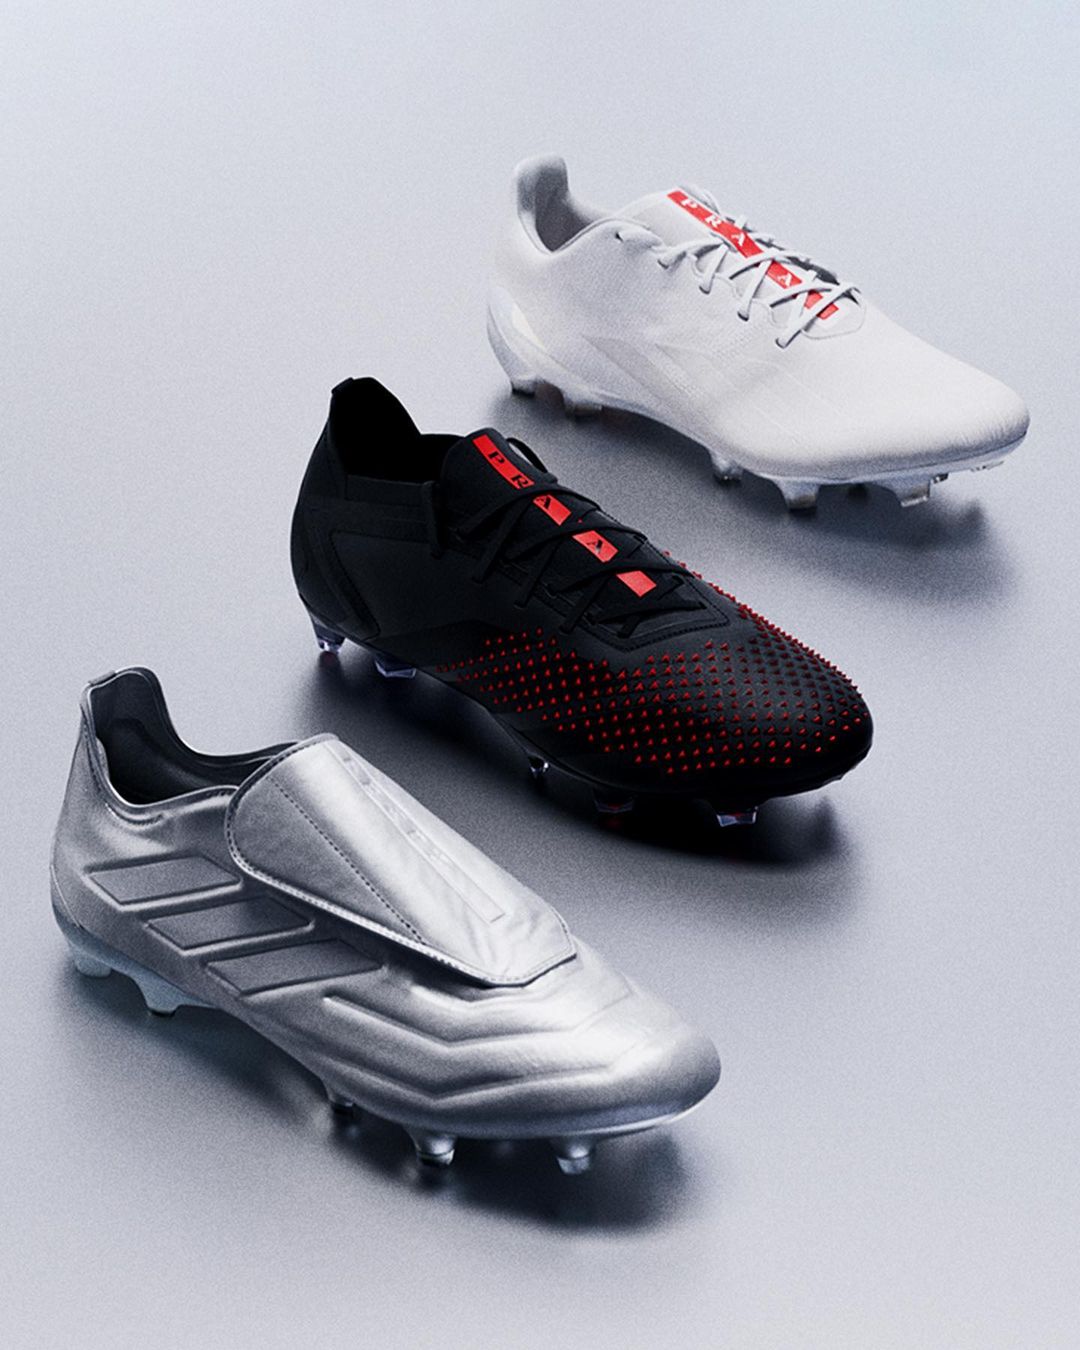 Adidas And Prada Kick Off First Luxury Football Shoe Collection